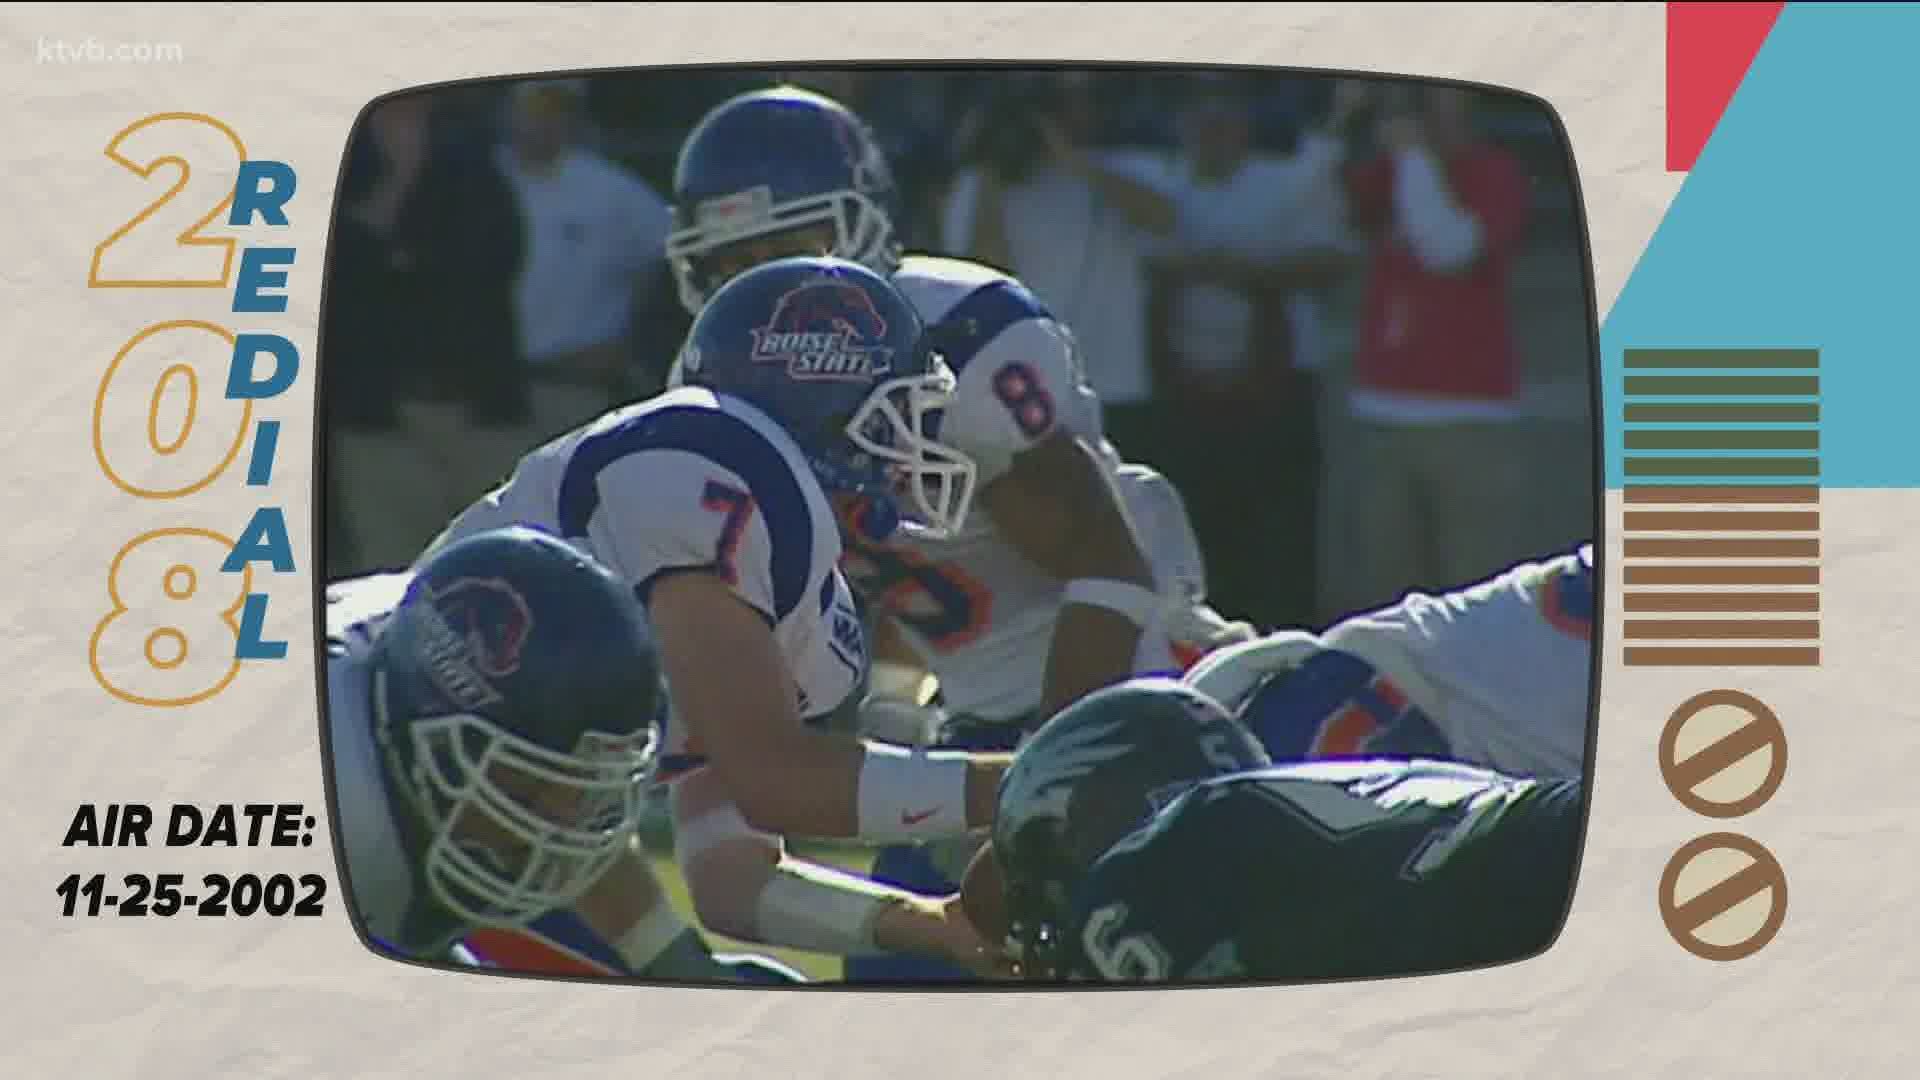 In 2002, the Boise State football team was going bowling on their own blue field for the third time in the World Sports Humanitarian Hall of Fame Humanitarian Bowl.